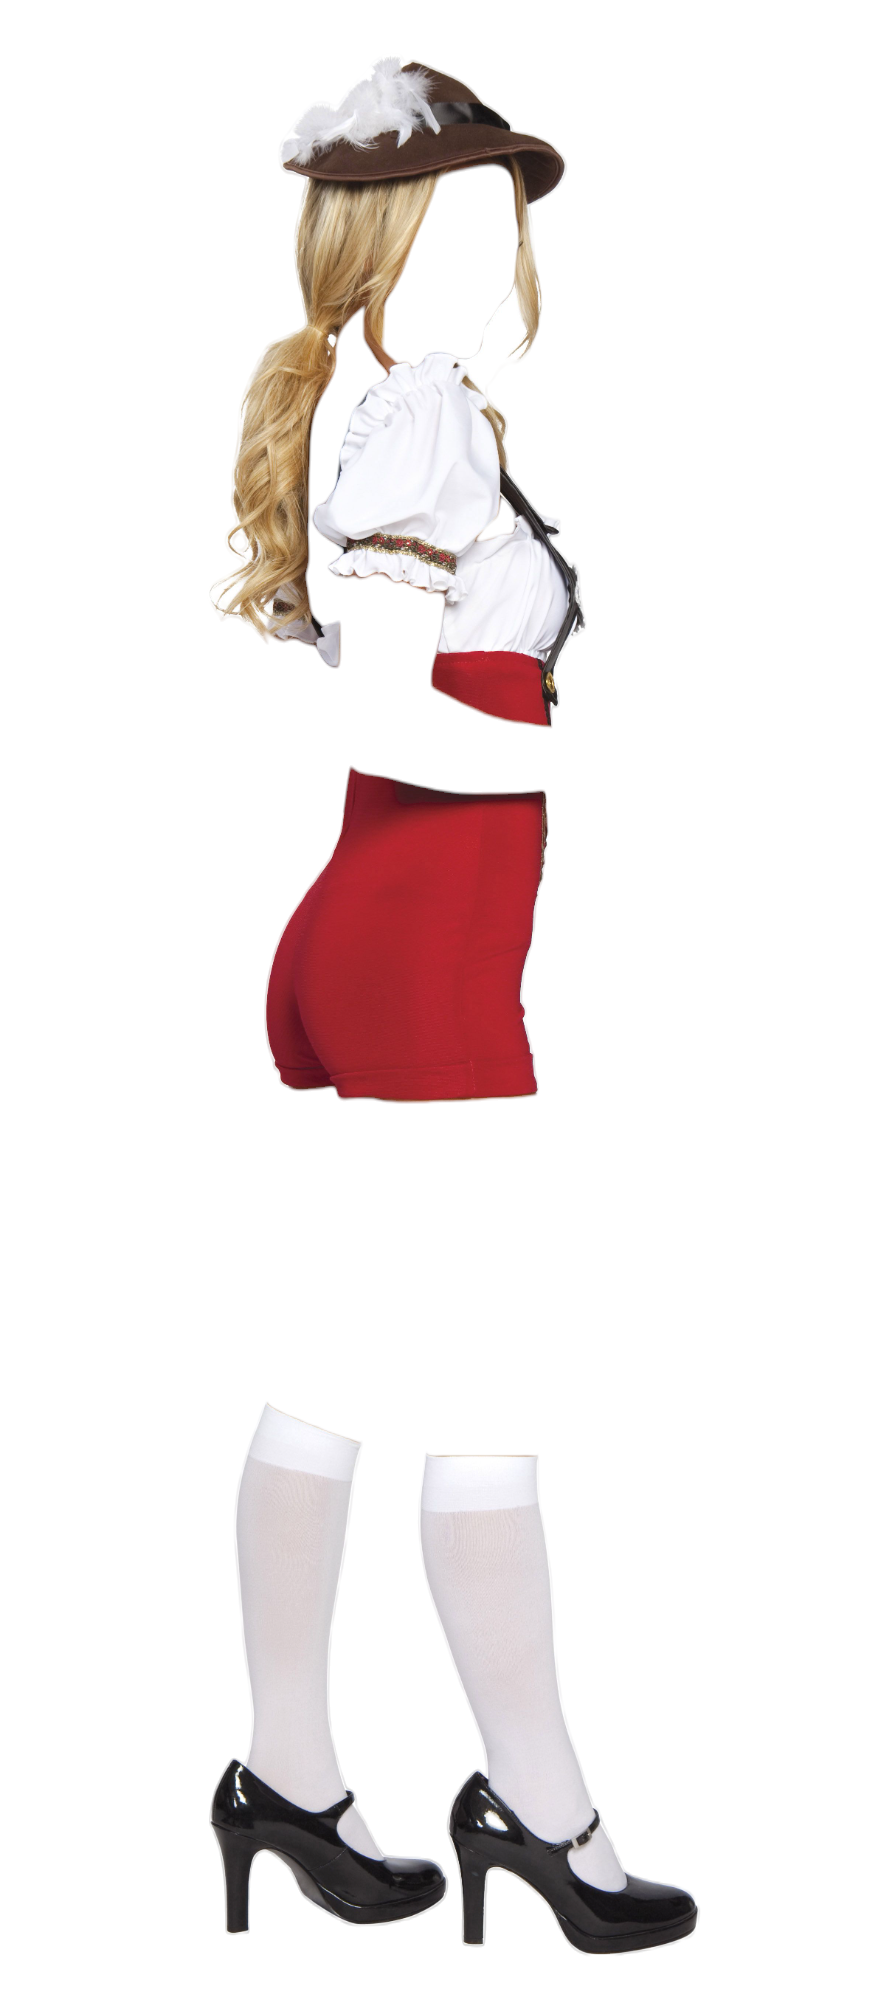 Roma Costume 4 PC Beer Stein Babe High Rise Romper Costume Red/White